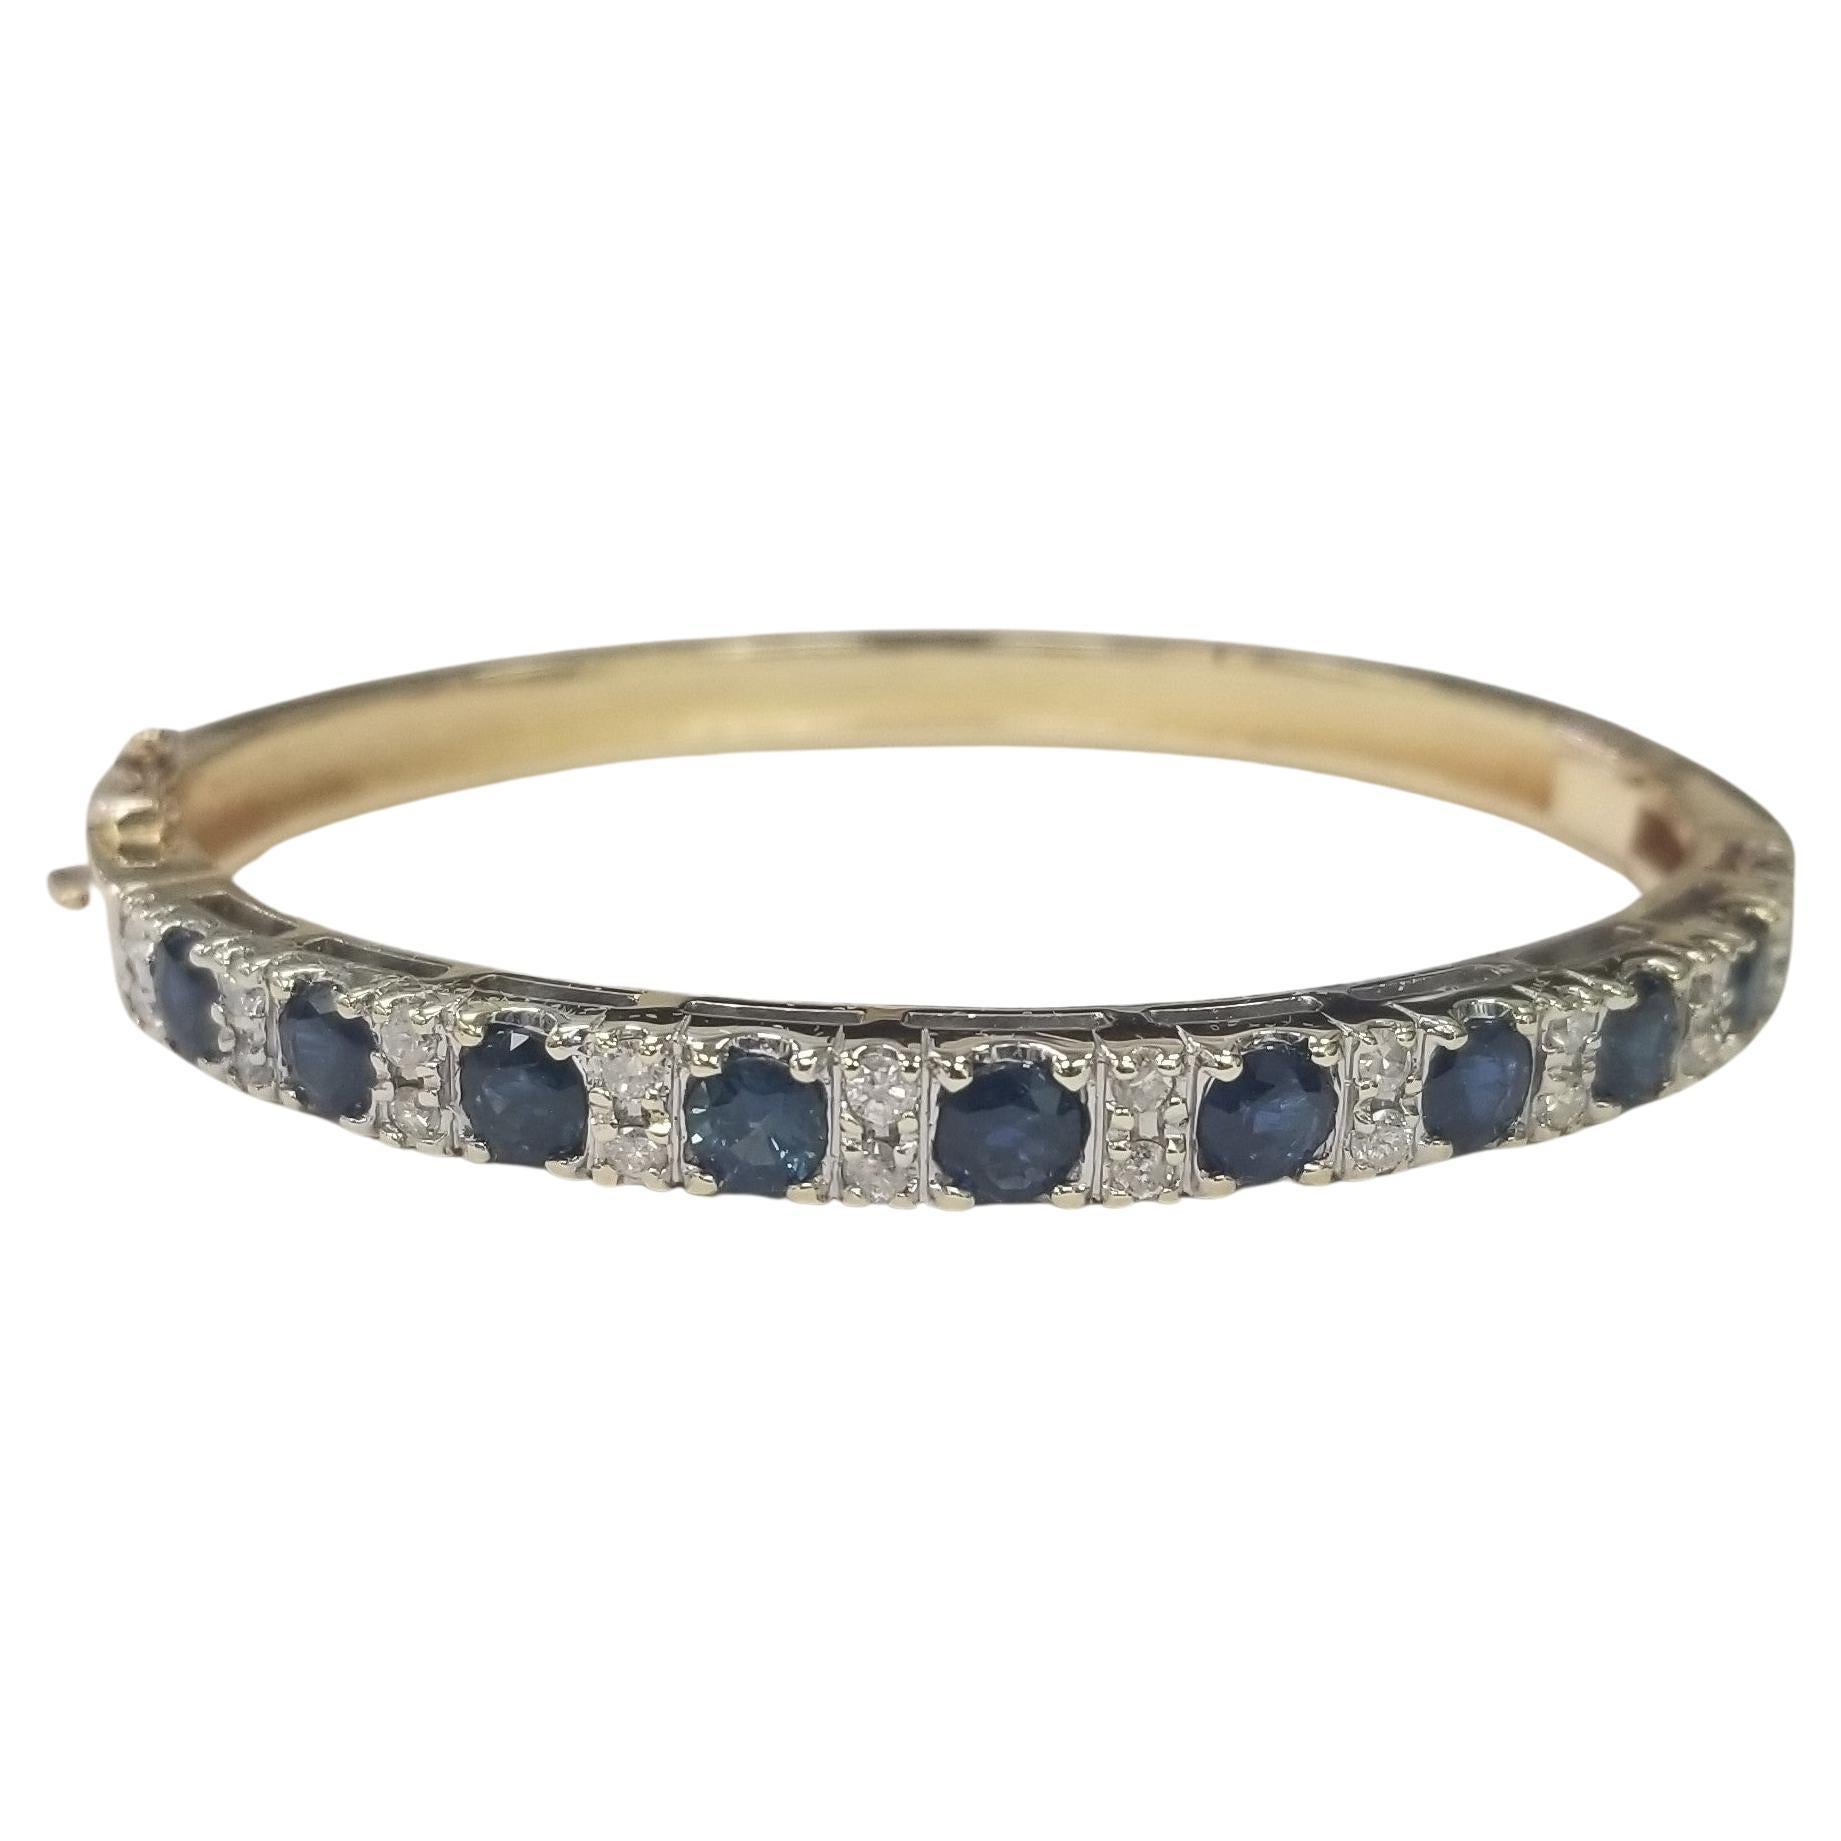 14k Yellow Gold Sapphire and Diamond "Bangle" Bracelet Weighing 4.00cts. For Sale